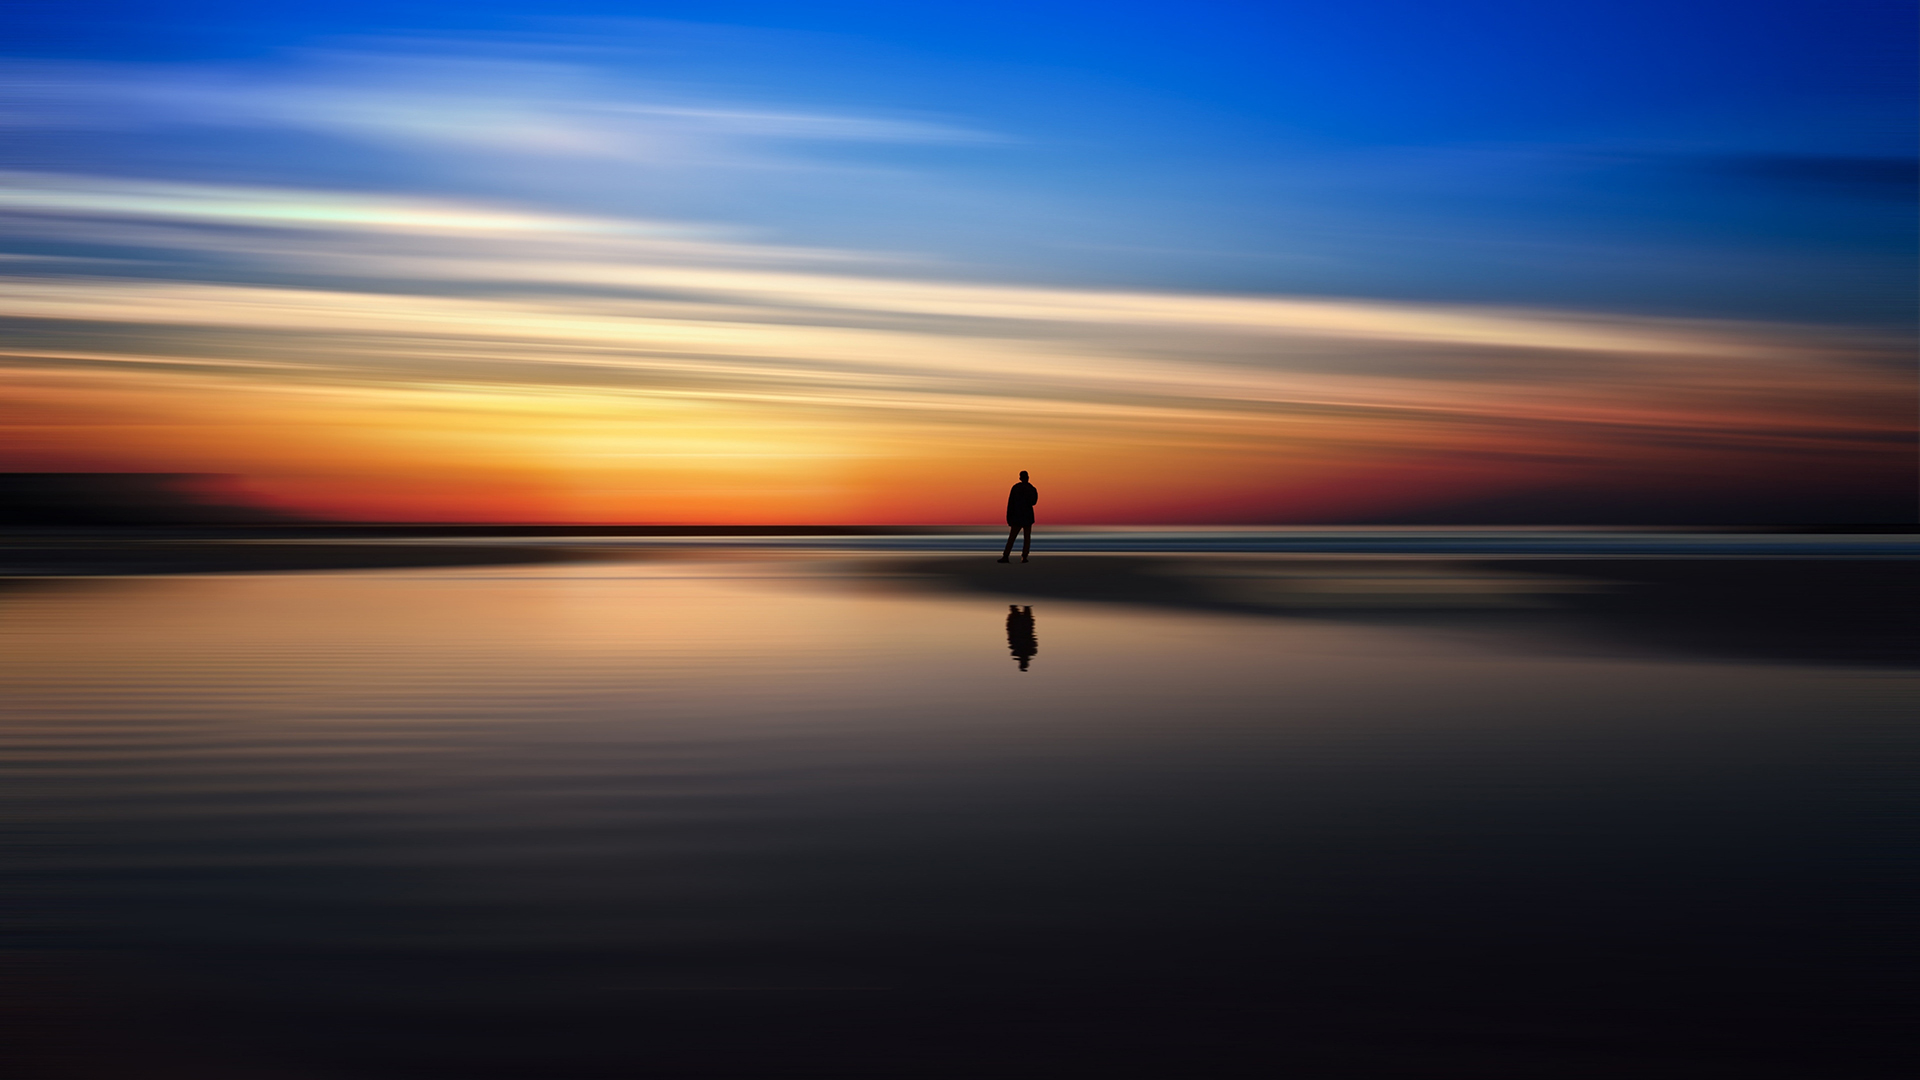 Silhouette Photography Nature People Alone Sky Sunset Solice Beach Calm 1920x1080